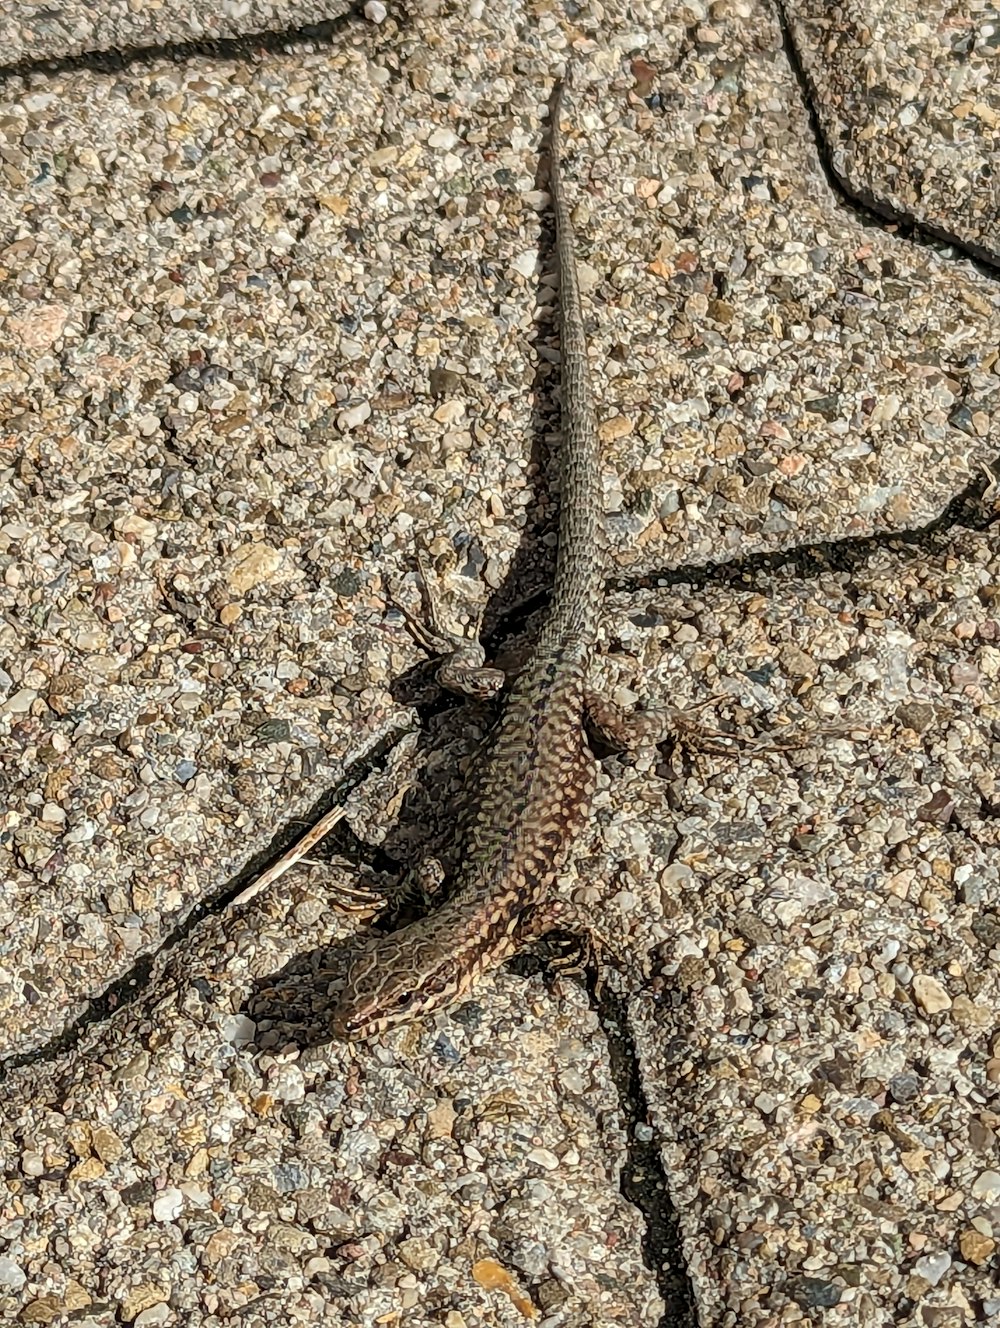 a lizard sitting on the ground in the sun